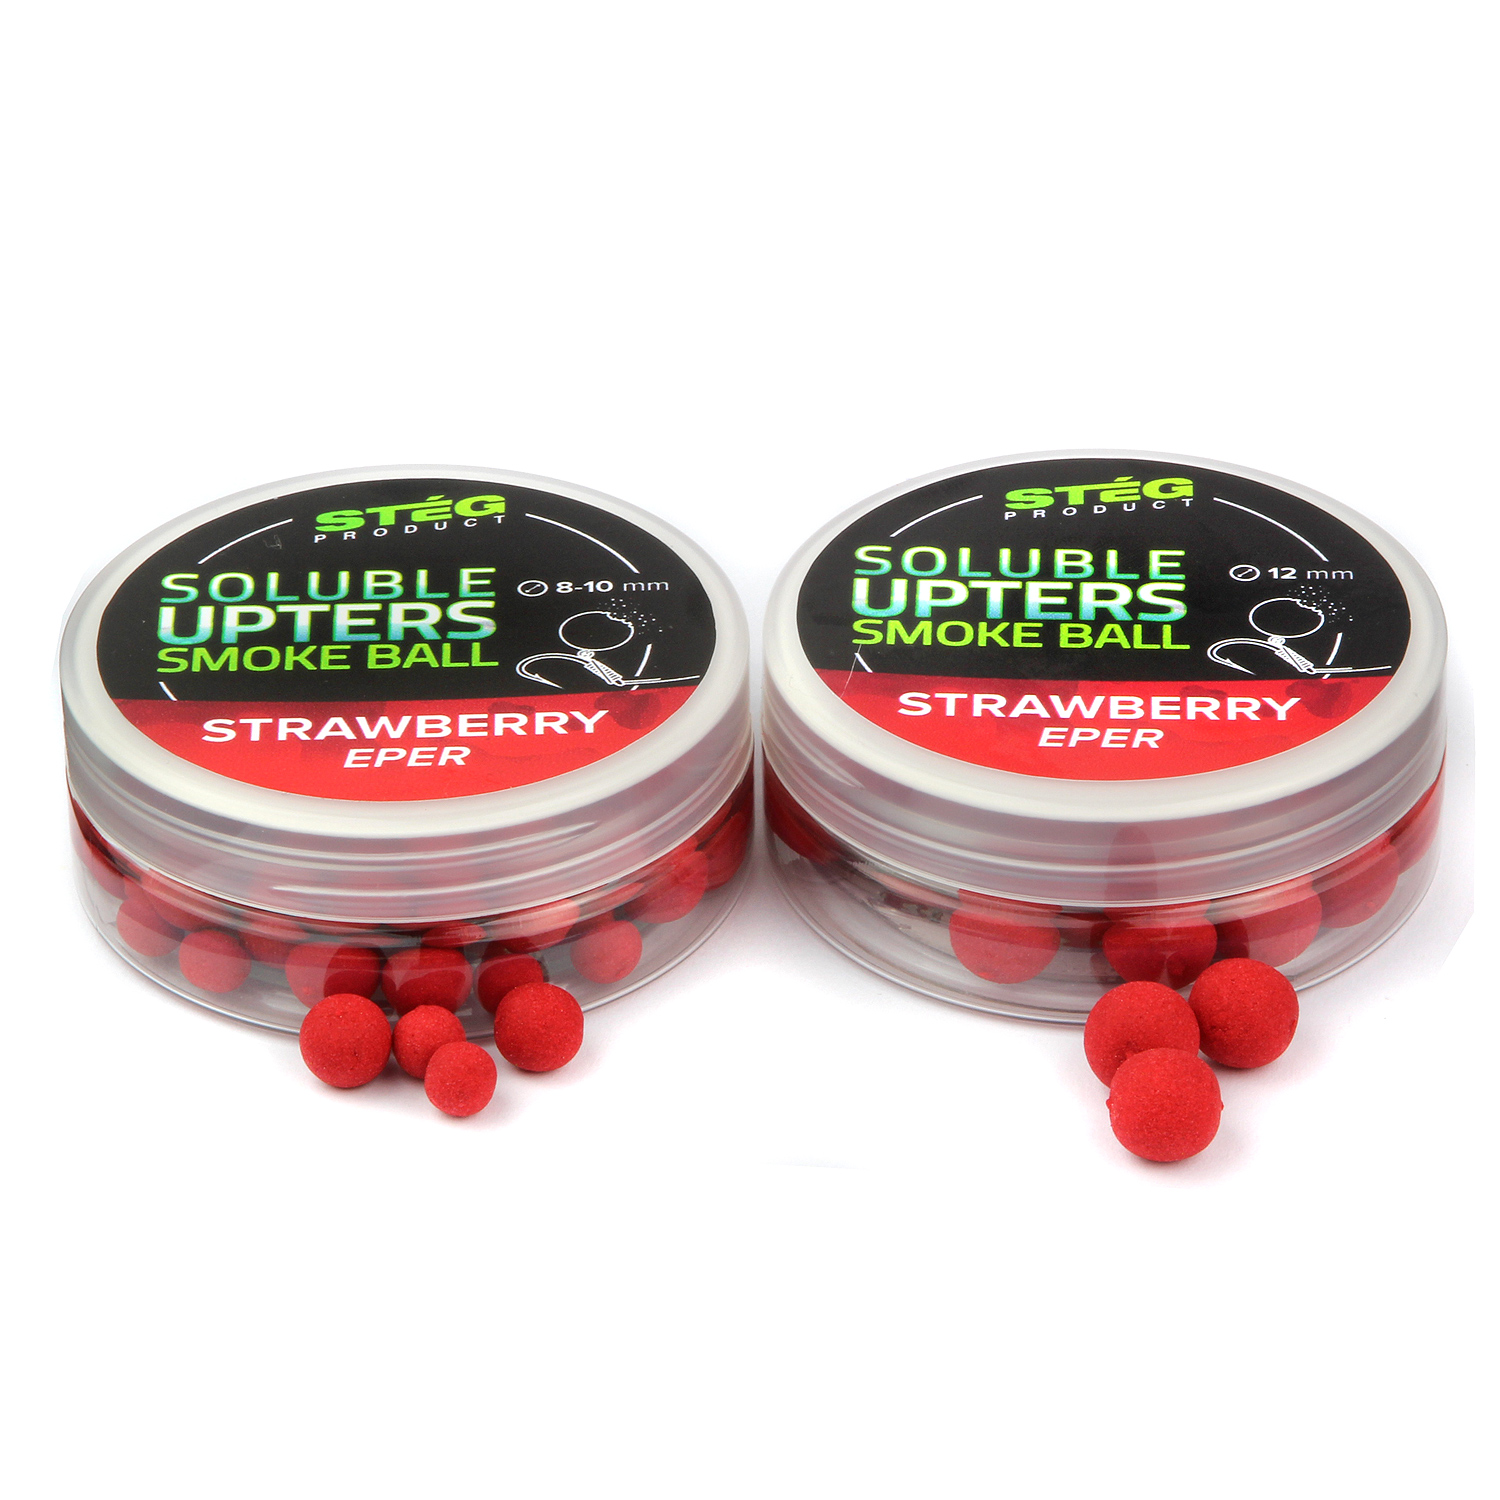 Stg Product Soluble Upters Smoke Ball 12mm Strawberry 30g